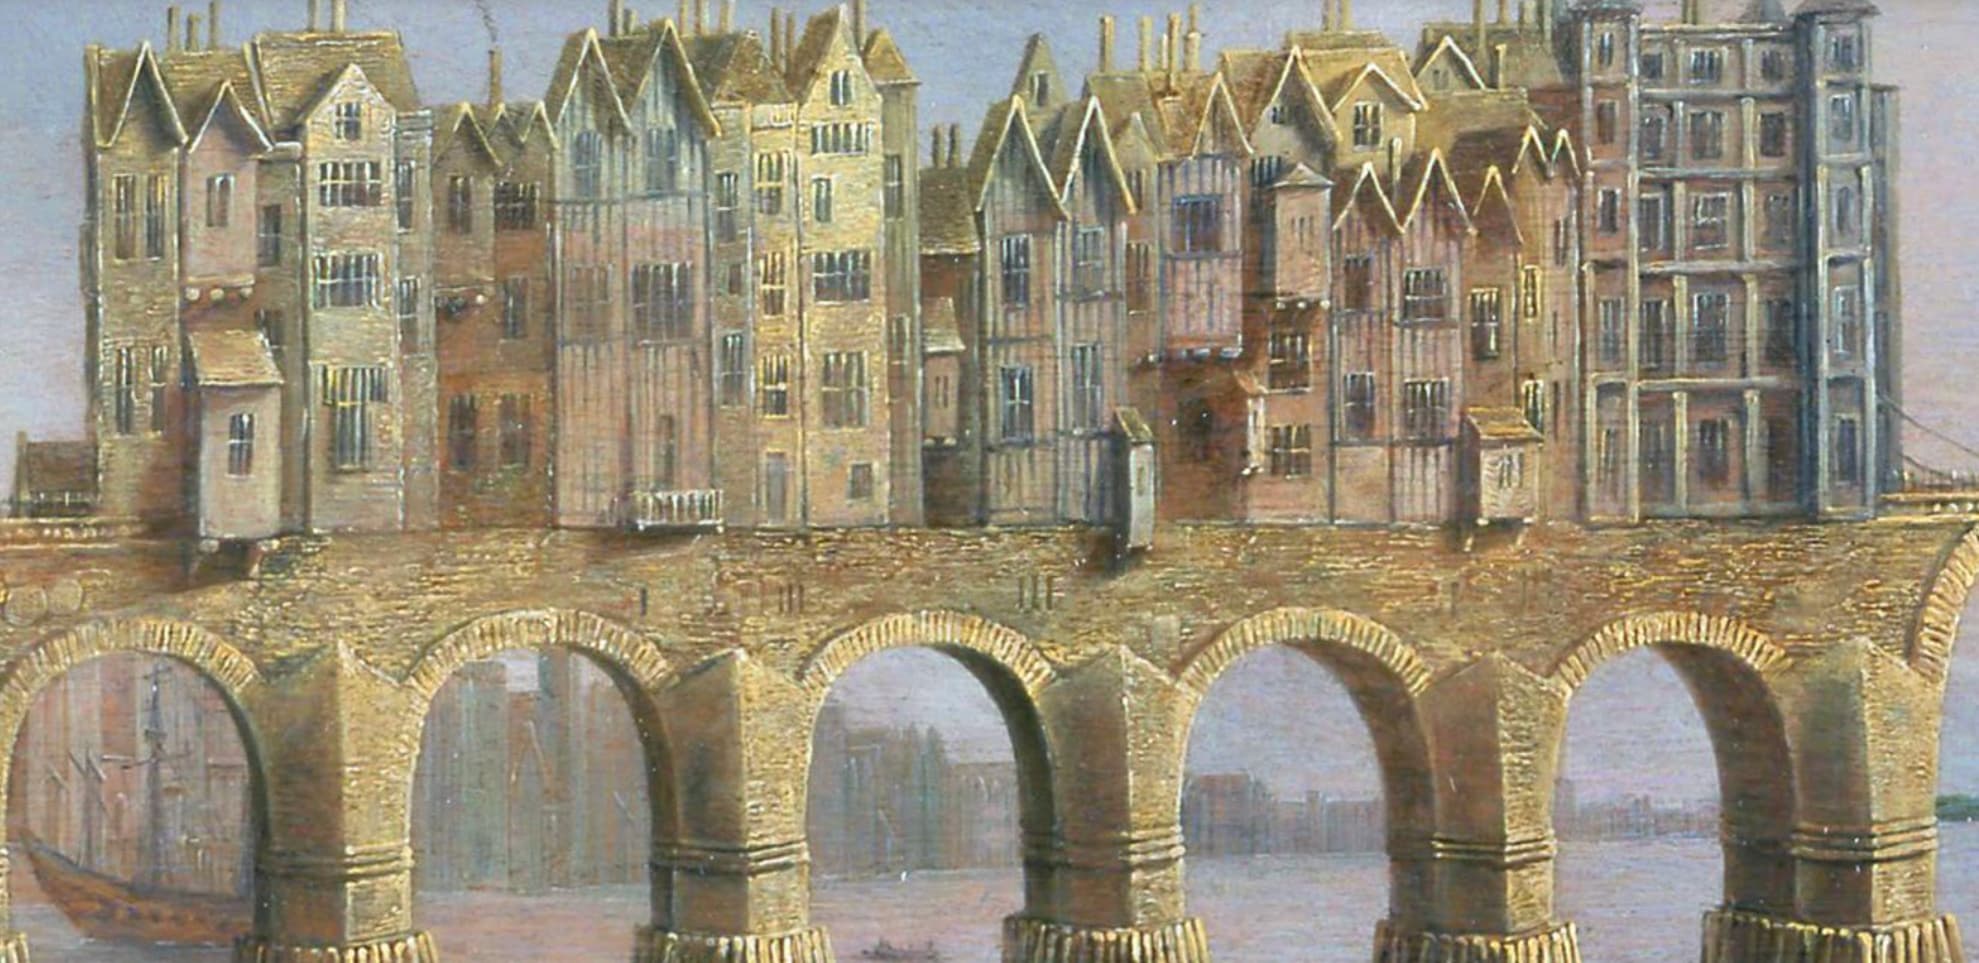 “London Bridge is Falling Down” is more than just a nursery rhyme. The British bridge has collapsed several times since its first iteration in 50 A.D. Its most notable fall came in 1281, when ice atop the frozen River Thames expanded, crushing several of the arches responsible for keeping the bridge upright. 